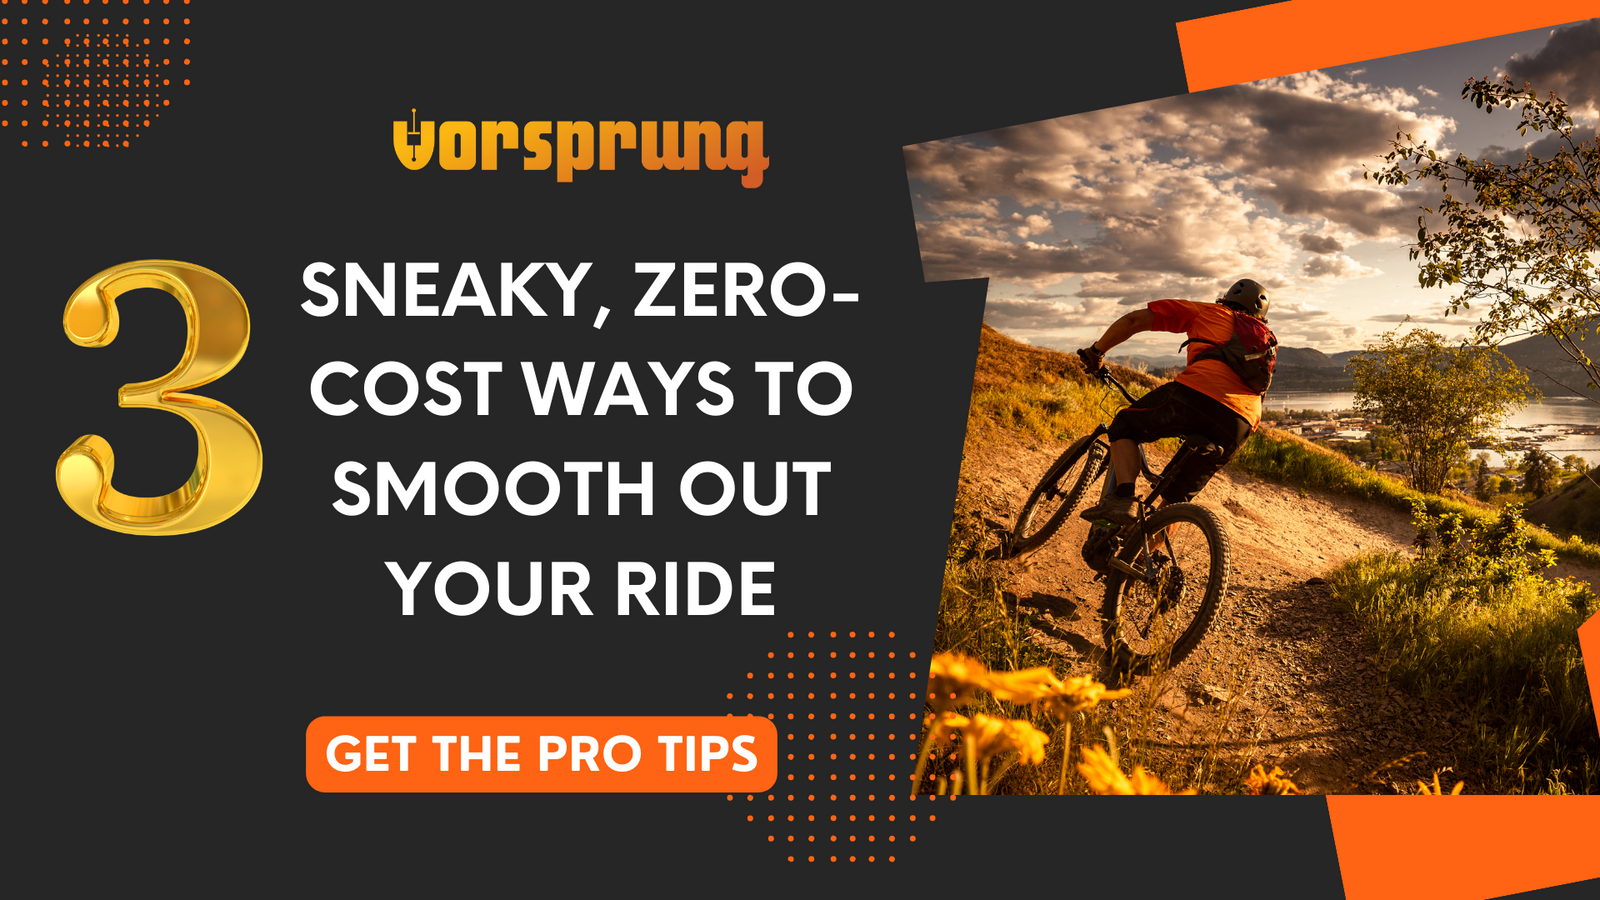 3 Sneaky Tips To Smooth Out Your Ride - For Free!